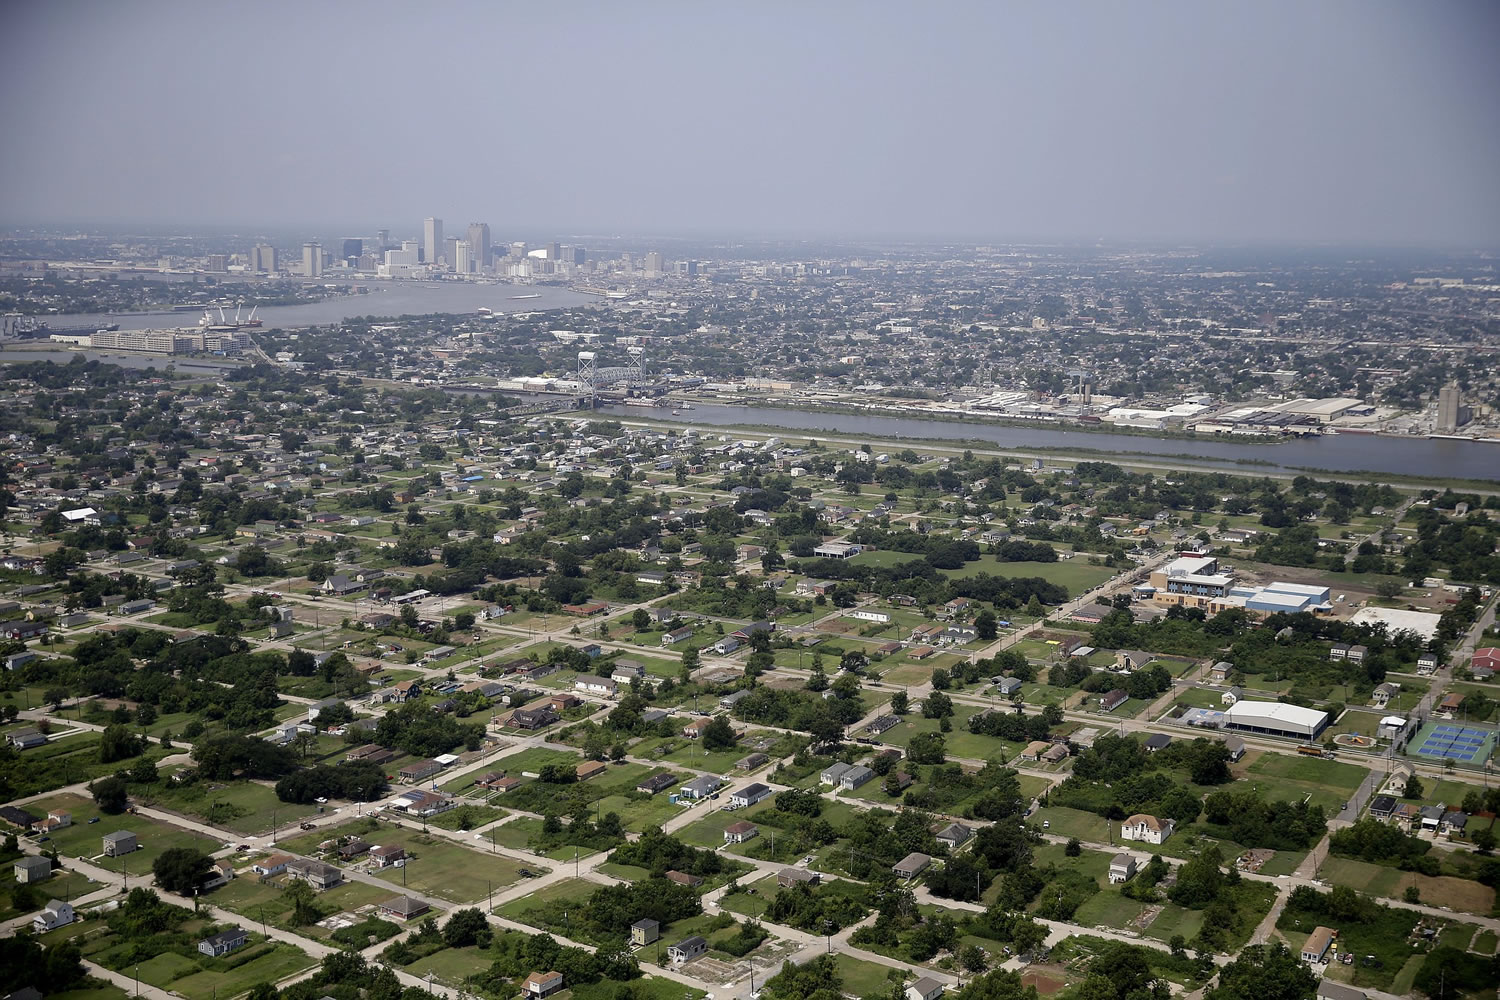 This aerial photo taken July 29 shows empty lots and mostly new buildings, foreground, in the Lower 9th Ward section of New Orleans, which was hardhit by Hurricane Katrina.